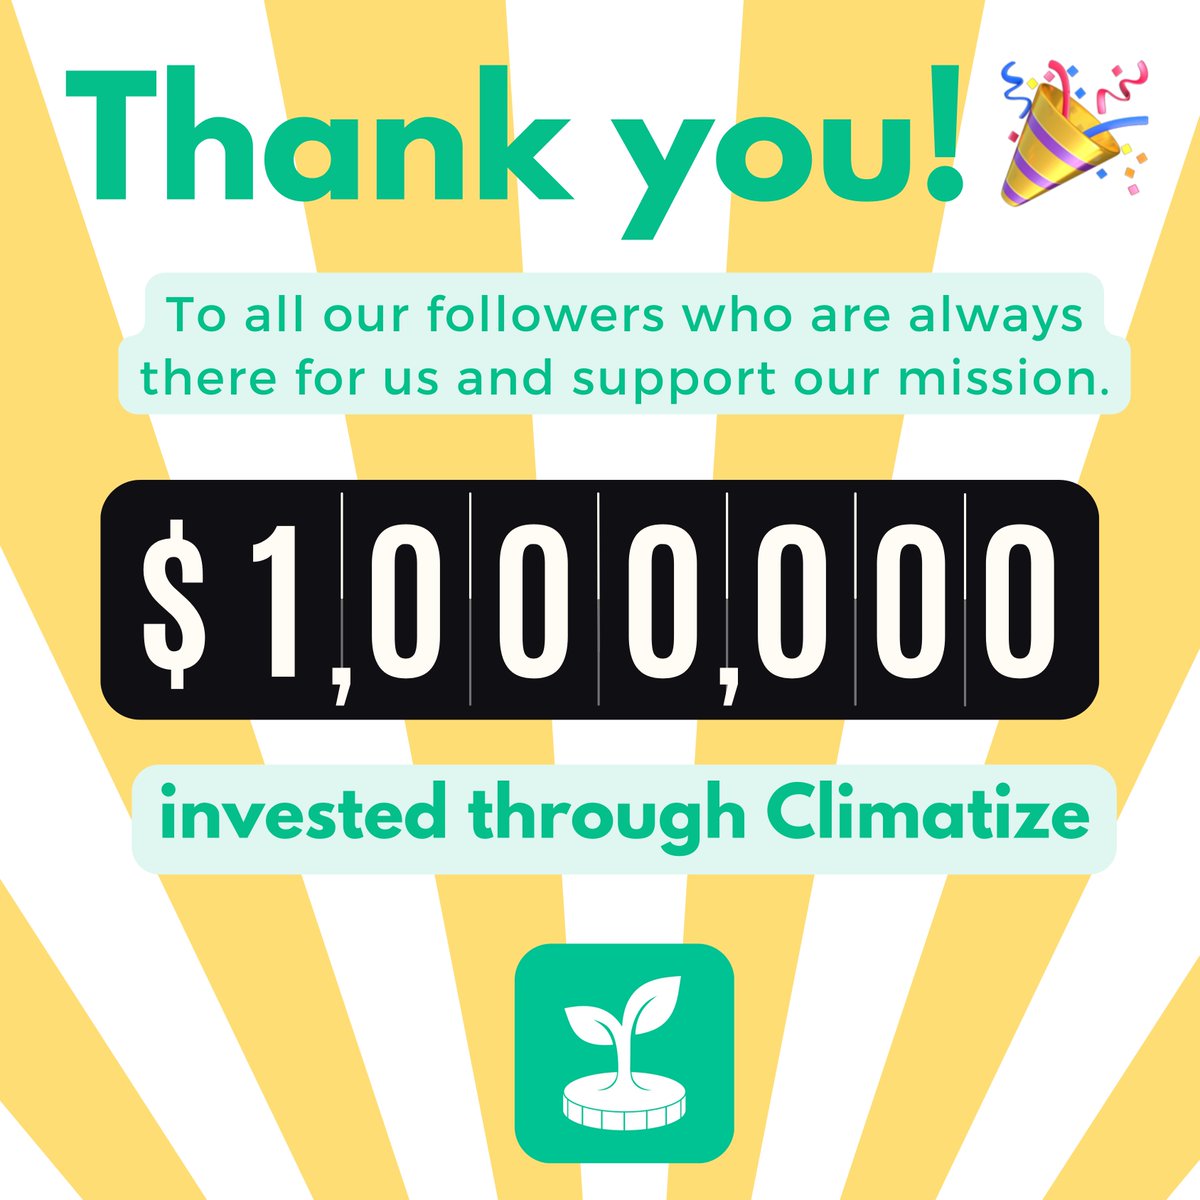 🎉 Over $1 million has been invested in renewable energy projects through Climatize! 🎉 In just 3 months since our launch we've built a community of investors who are passionate about investing in the energy transition. Please note that investment risks do apply.